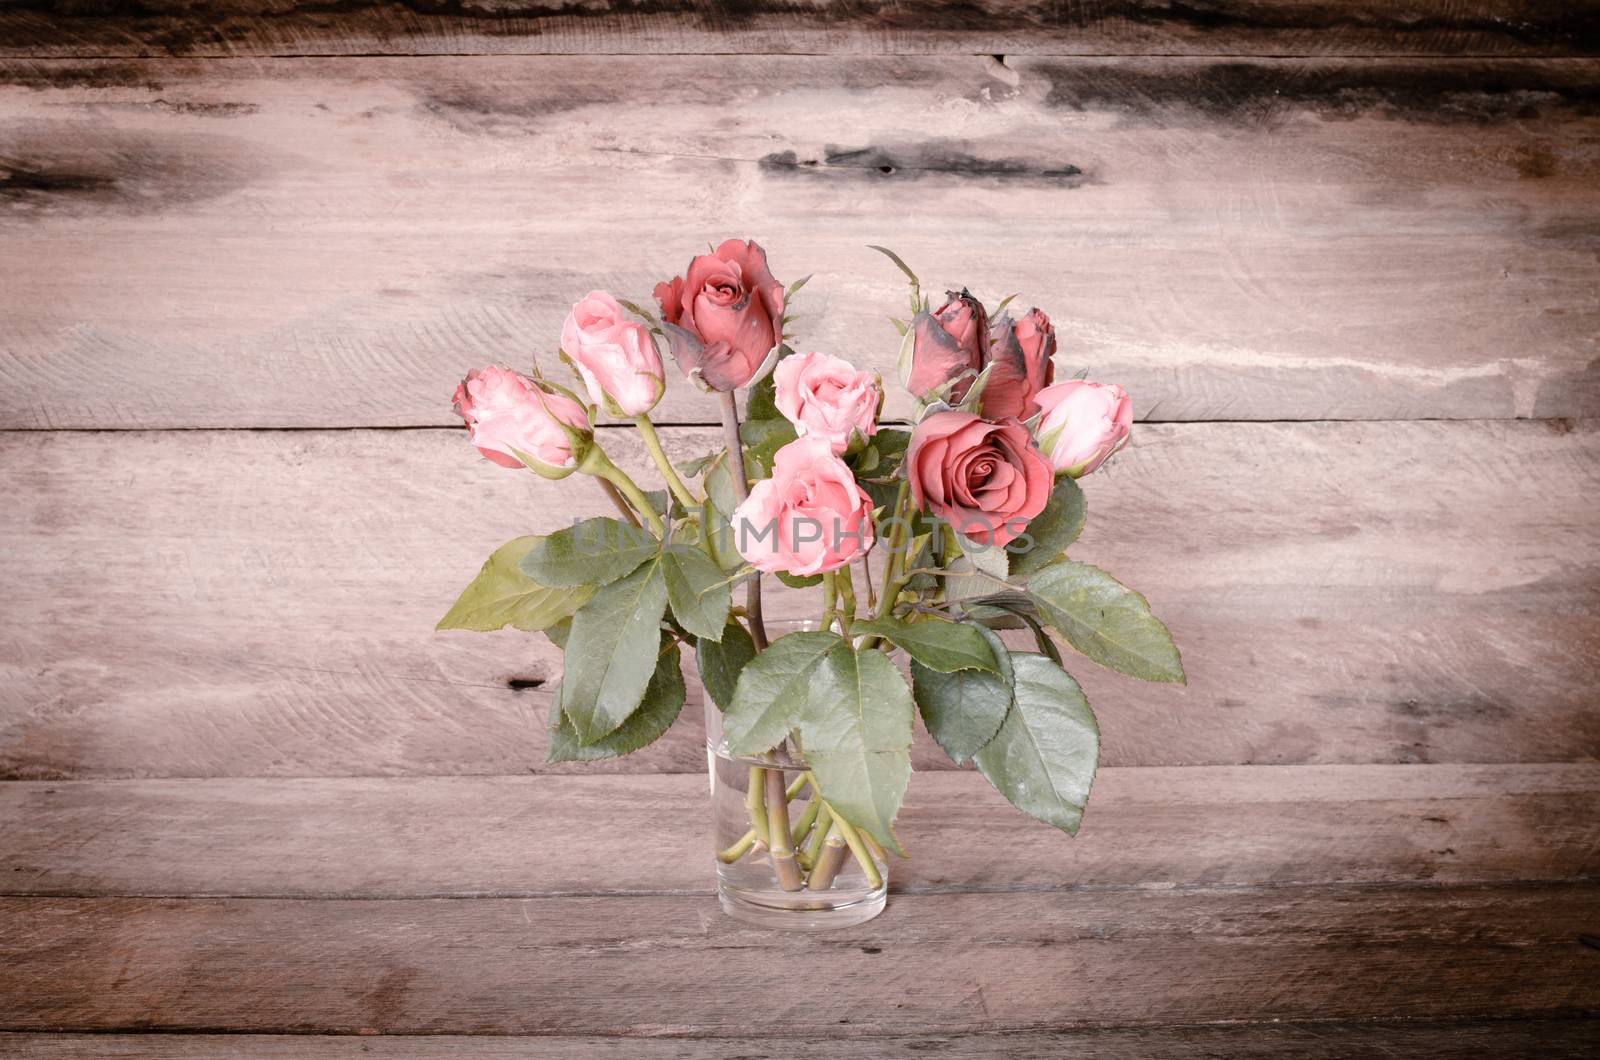   roses in glass on wooden bacgrould by photobyphotoboy